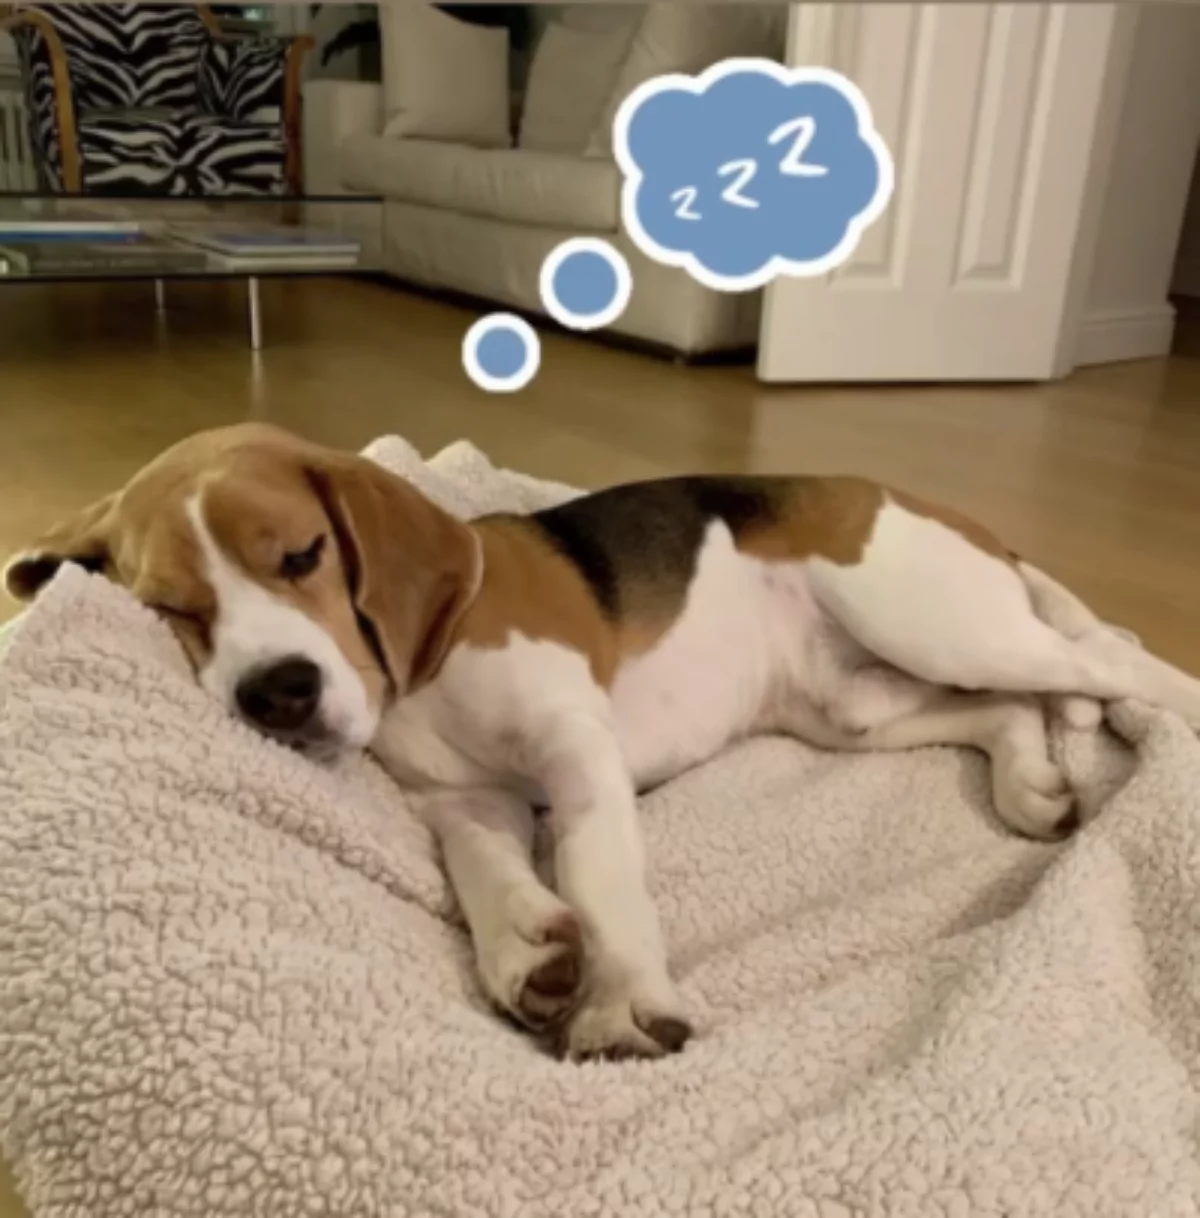 Beagle sleeping with dreaming clouds